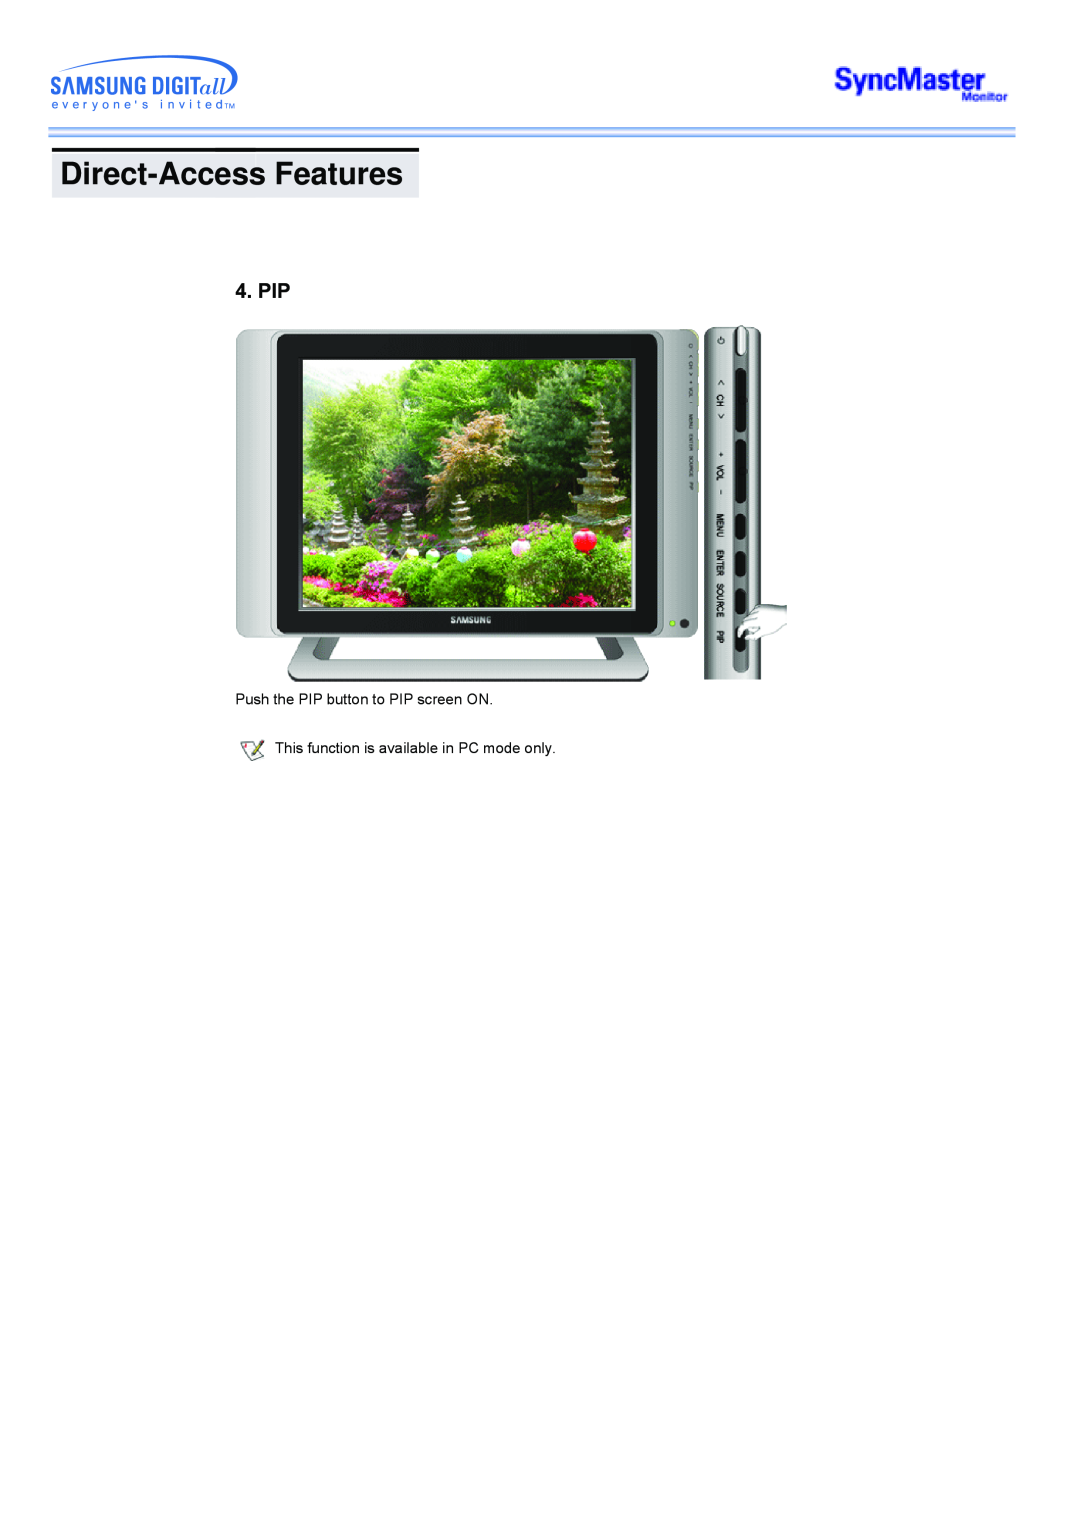 Samsung 173MP manual Pip, Direct-Access Features, Push the PIP button to PIP screen ON 